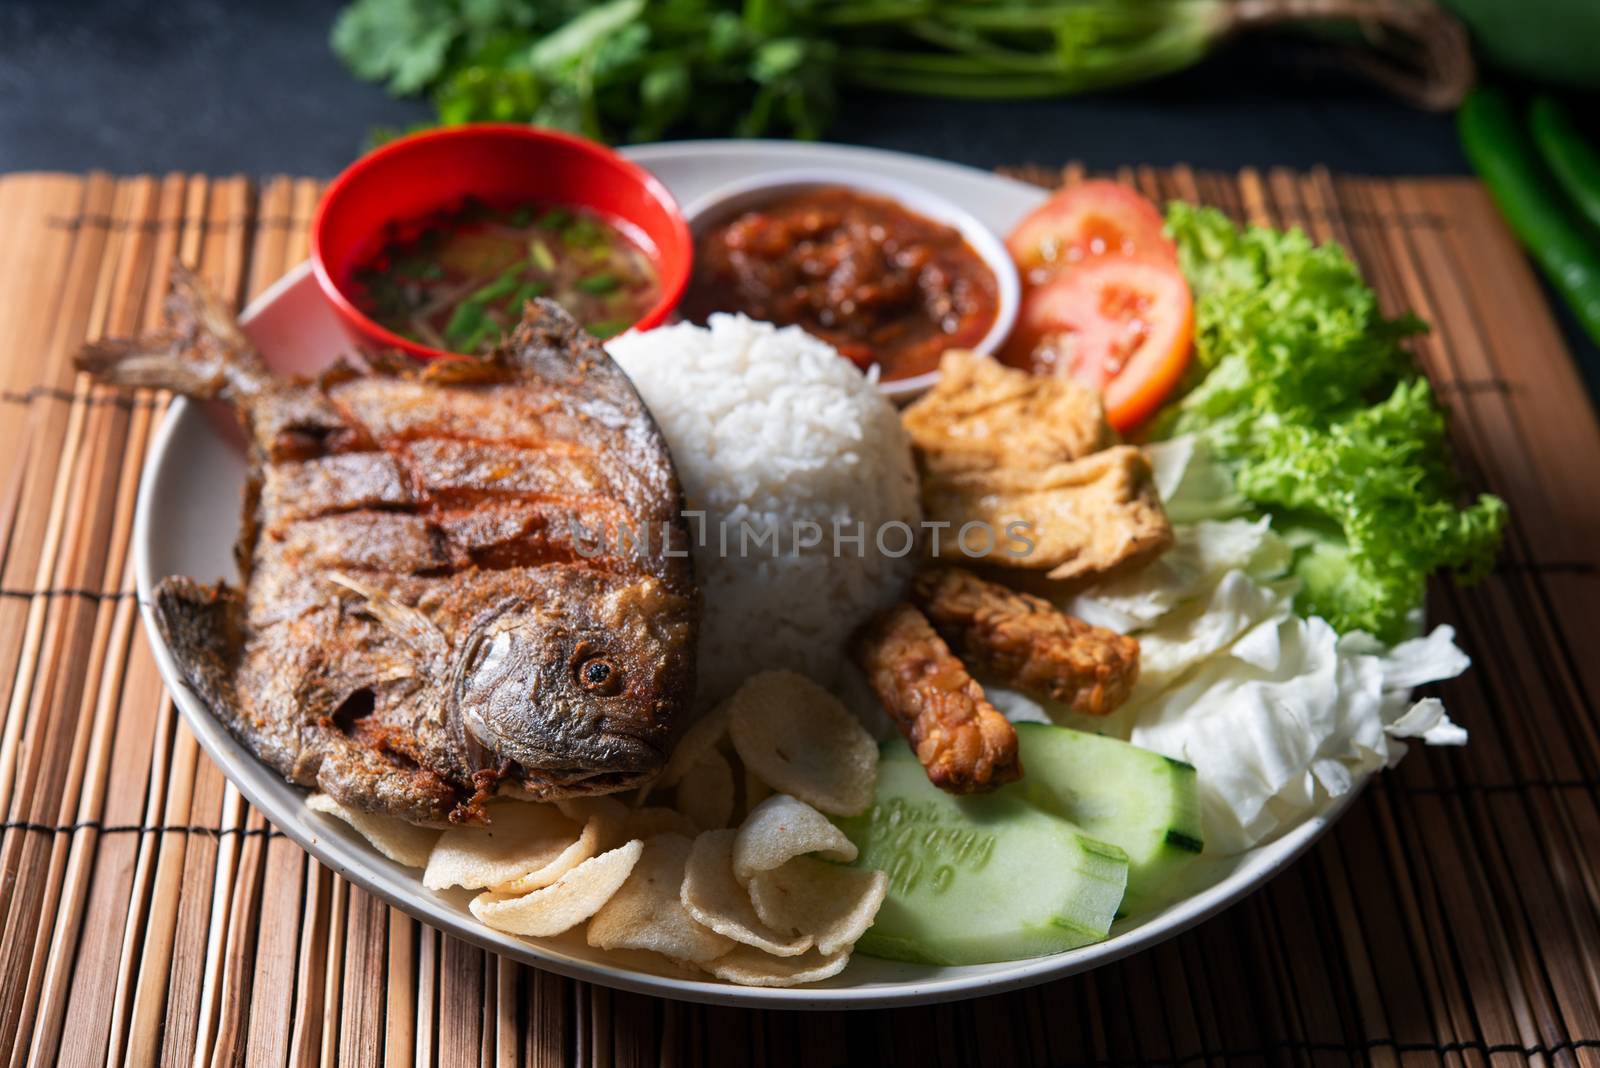 Fried pomfret fish and rice by szefei